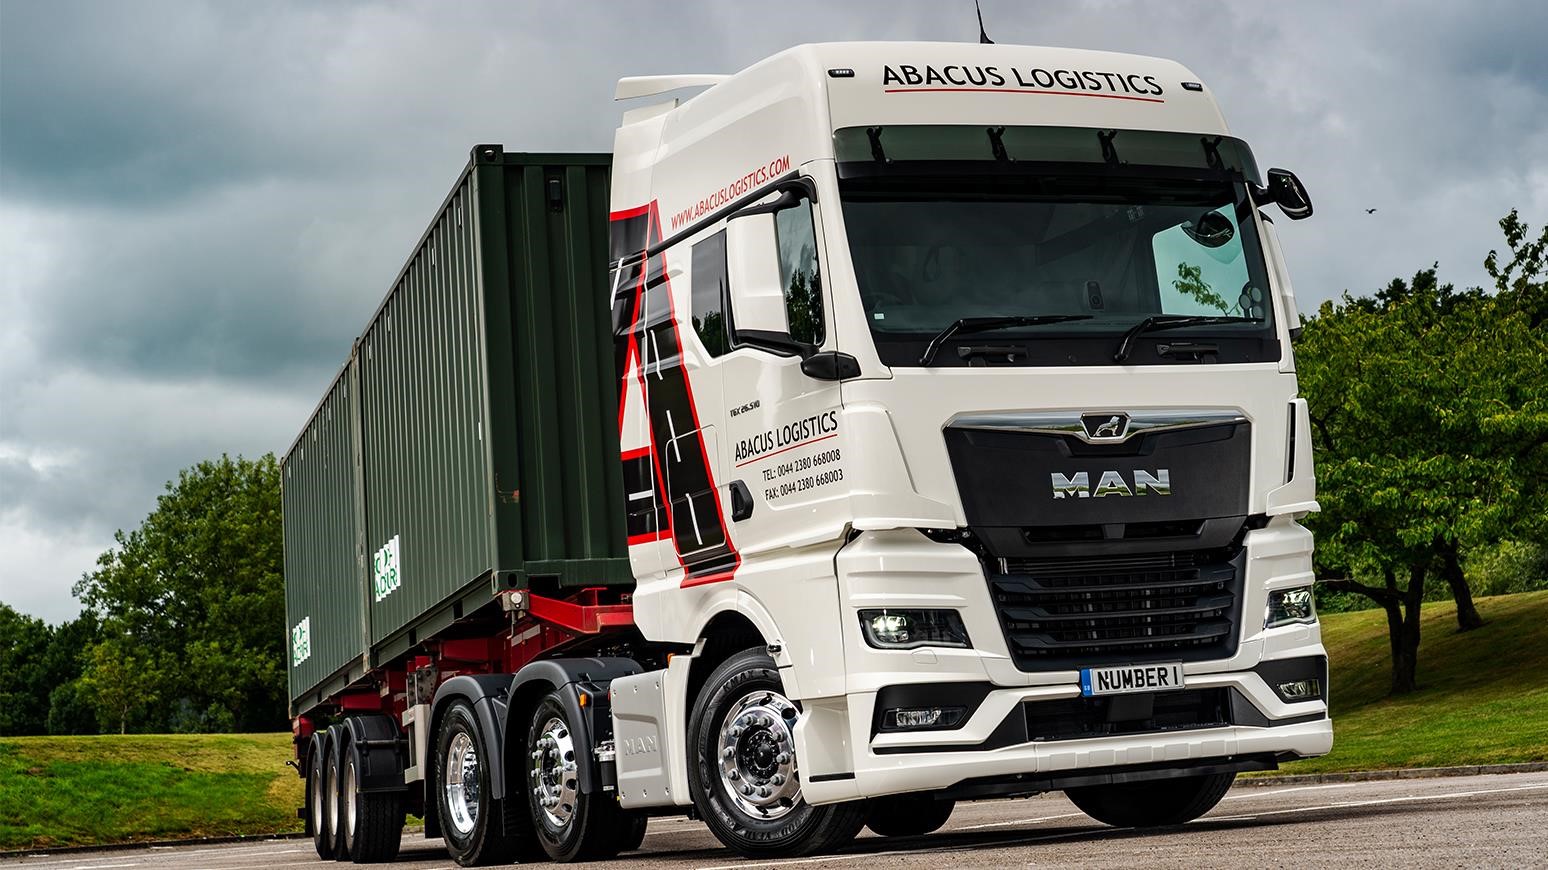 Southampton-Based Abacus Logistics Acquires UK’s First New Generation MAN TGX Tractor